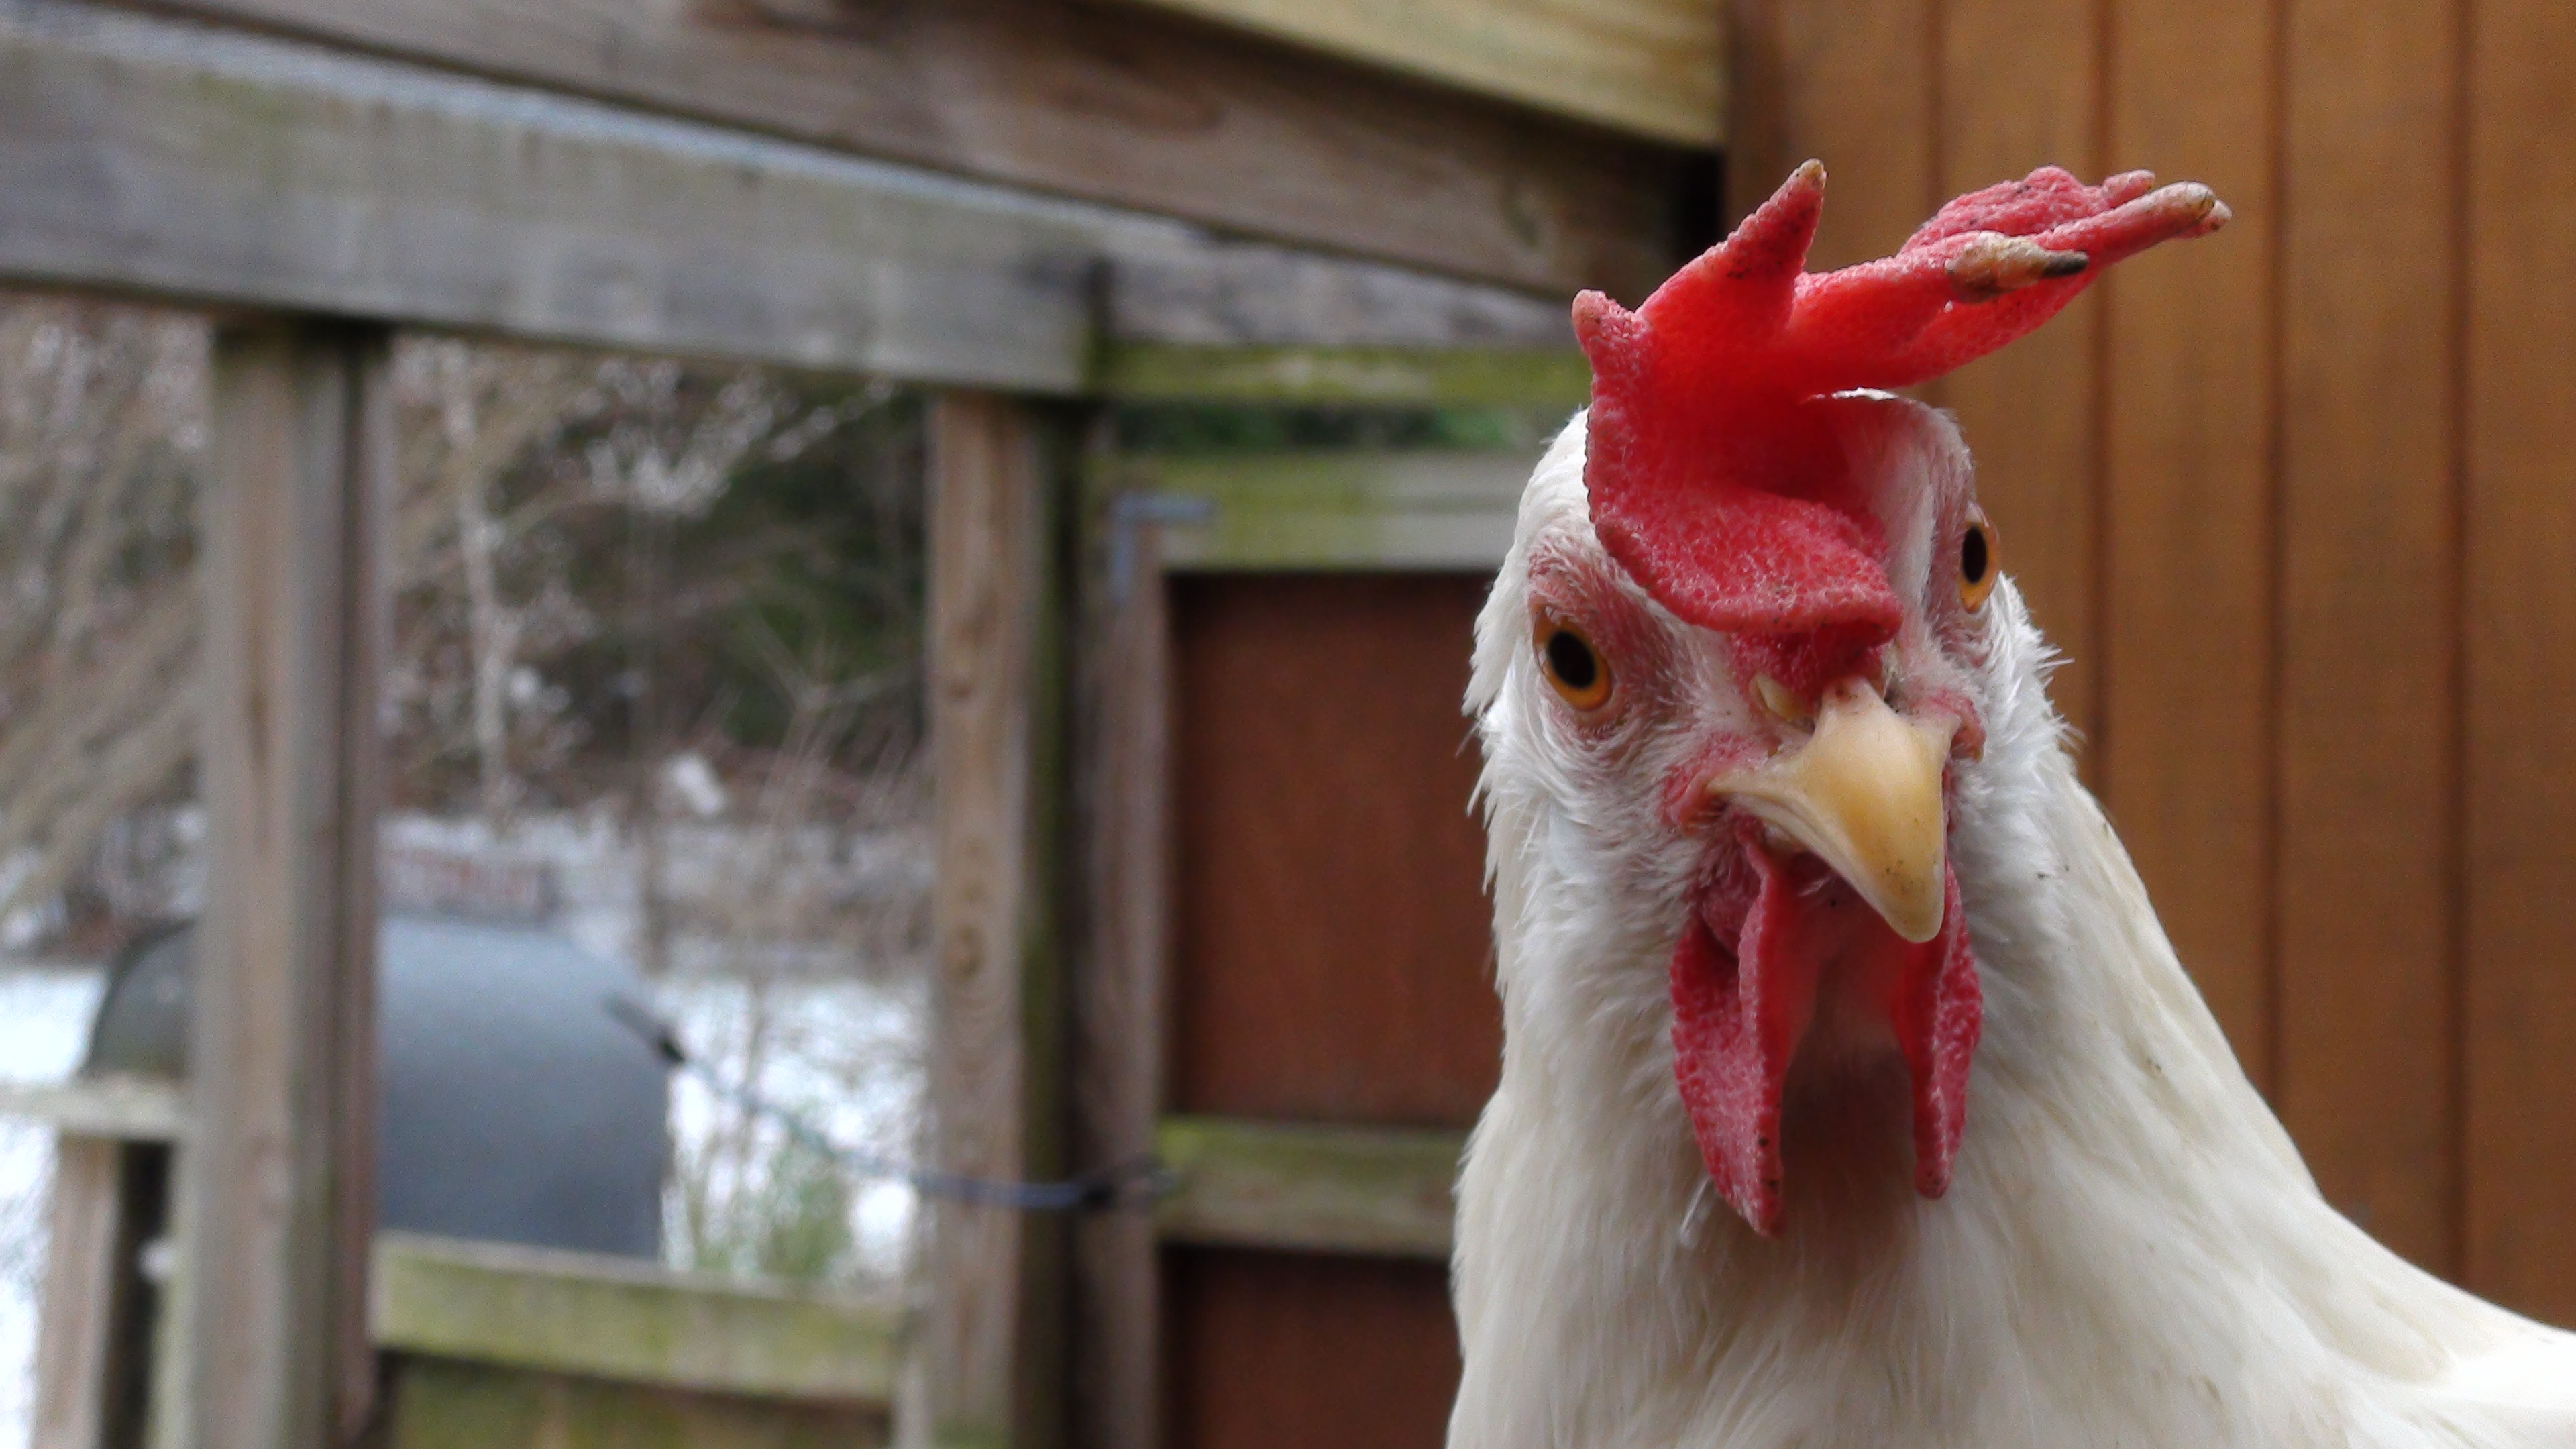 leghorn, who we call "foghorn" after looney toons